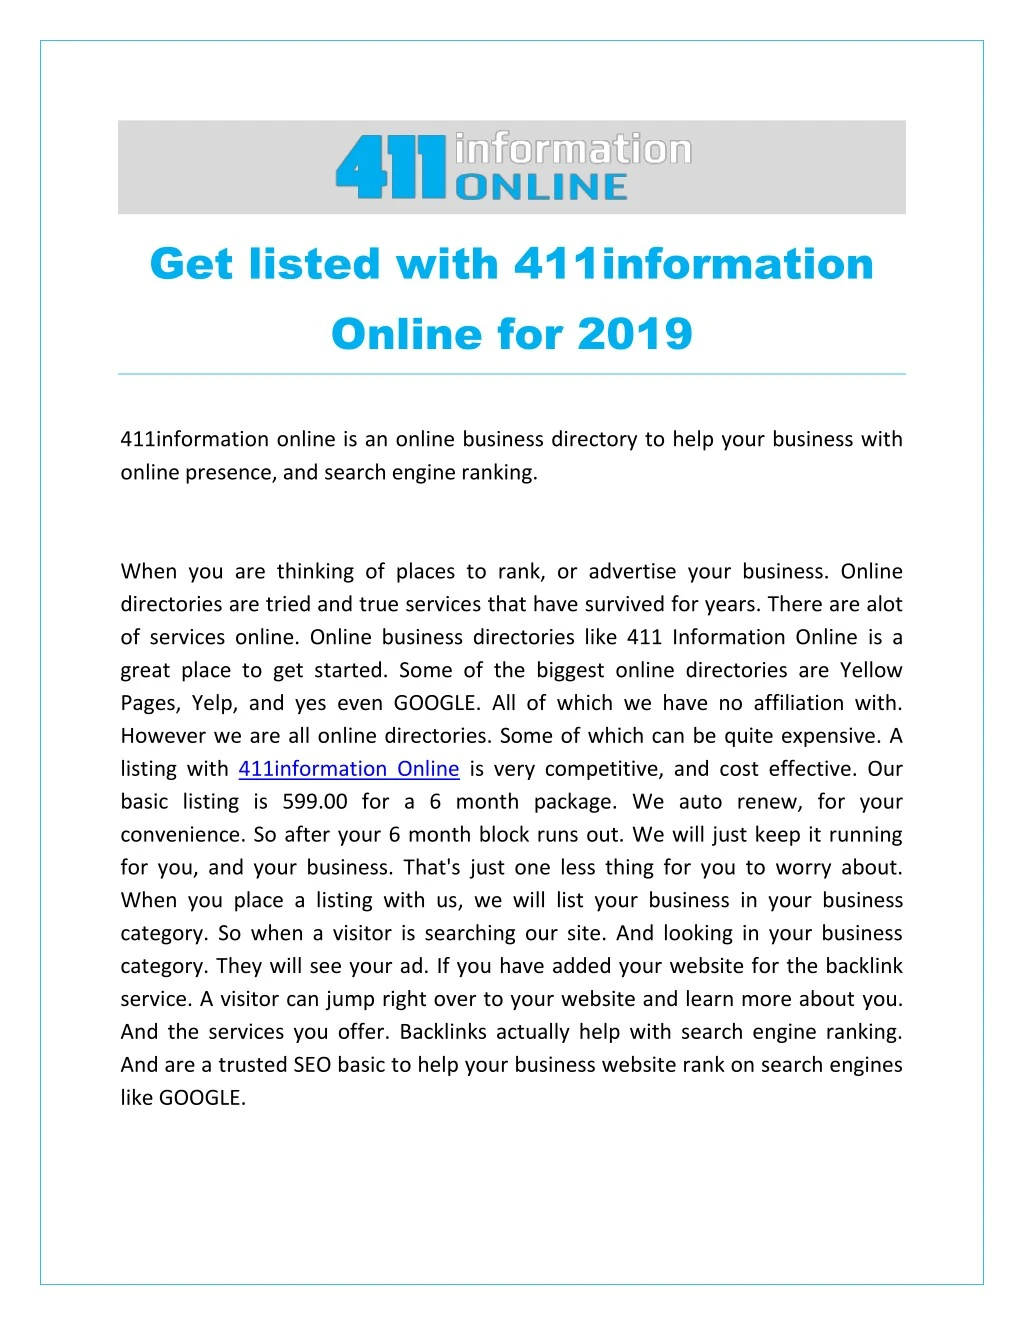 get listed with 411information online for 2019